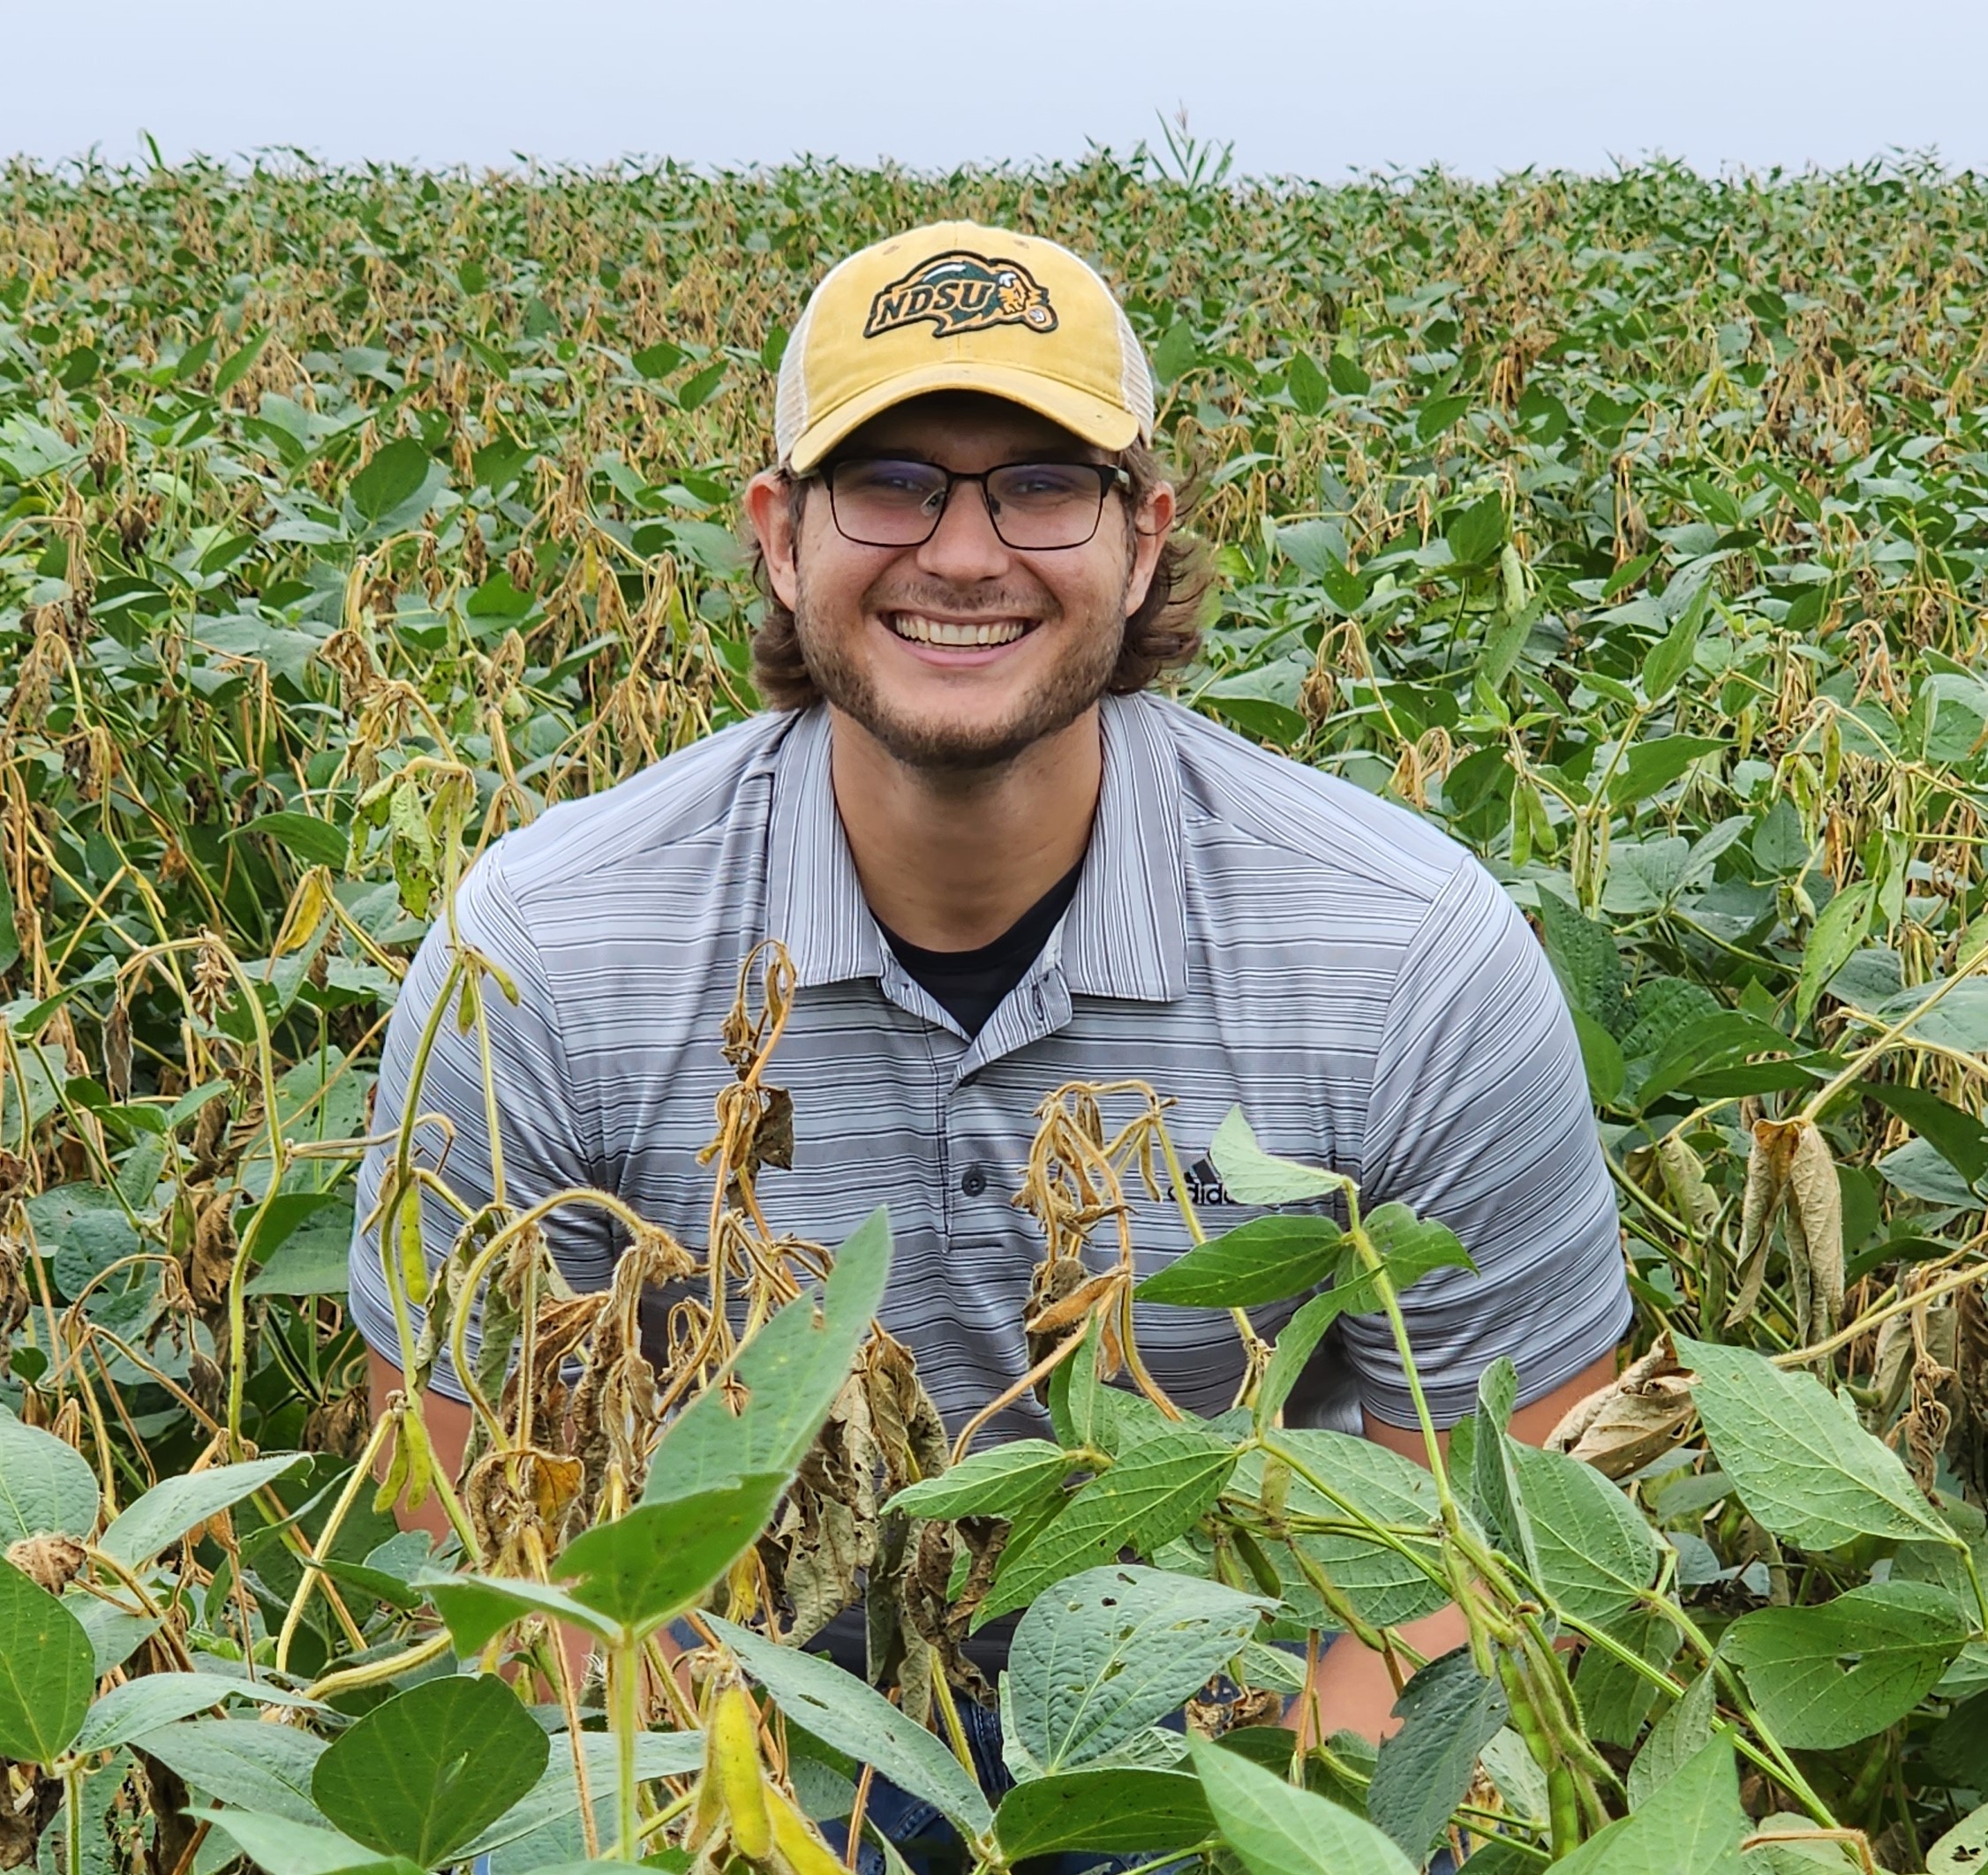 Webster is excited to build strong relationships with the North Dakota soybean community and industry. (NDSU photo)